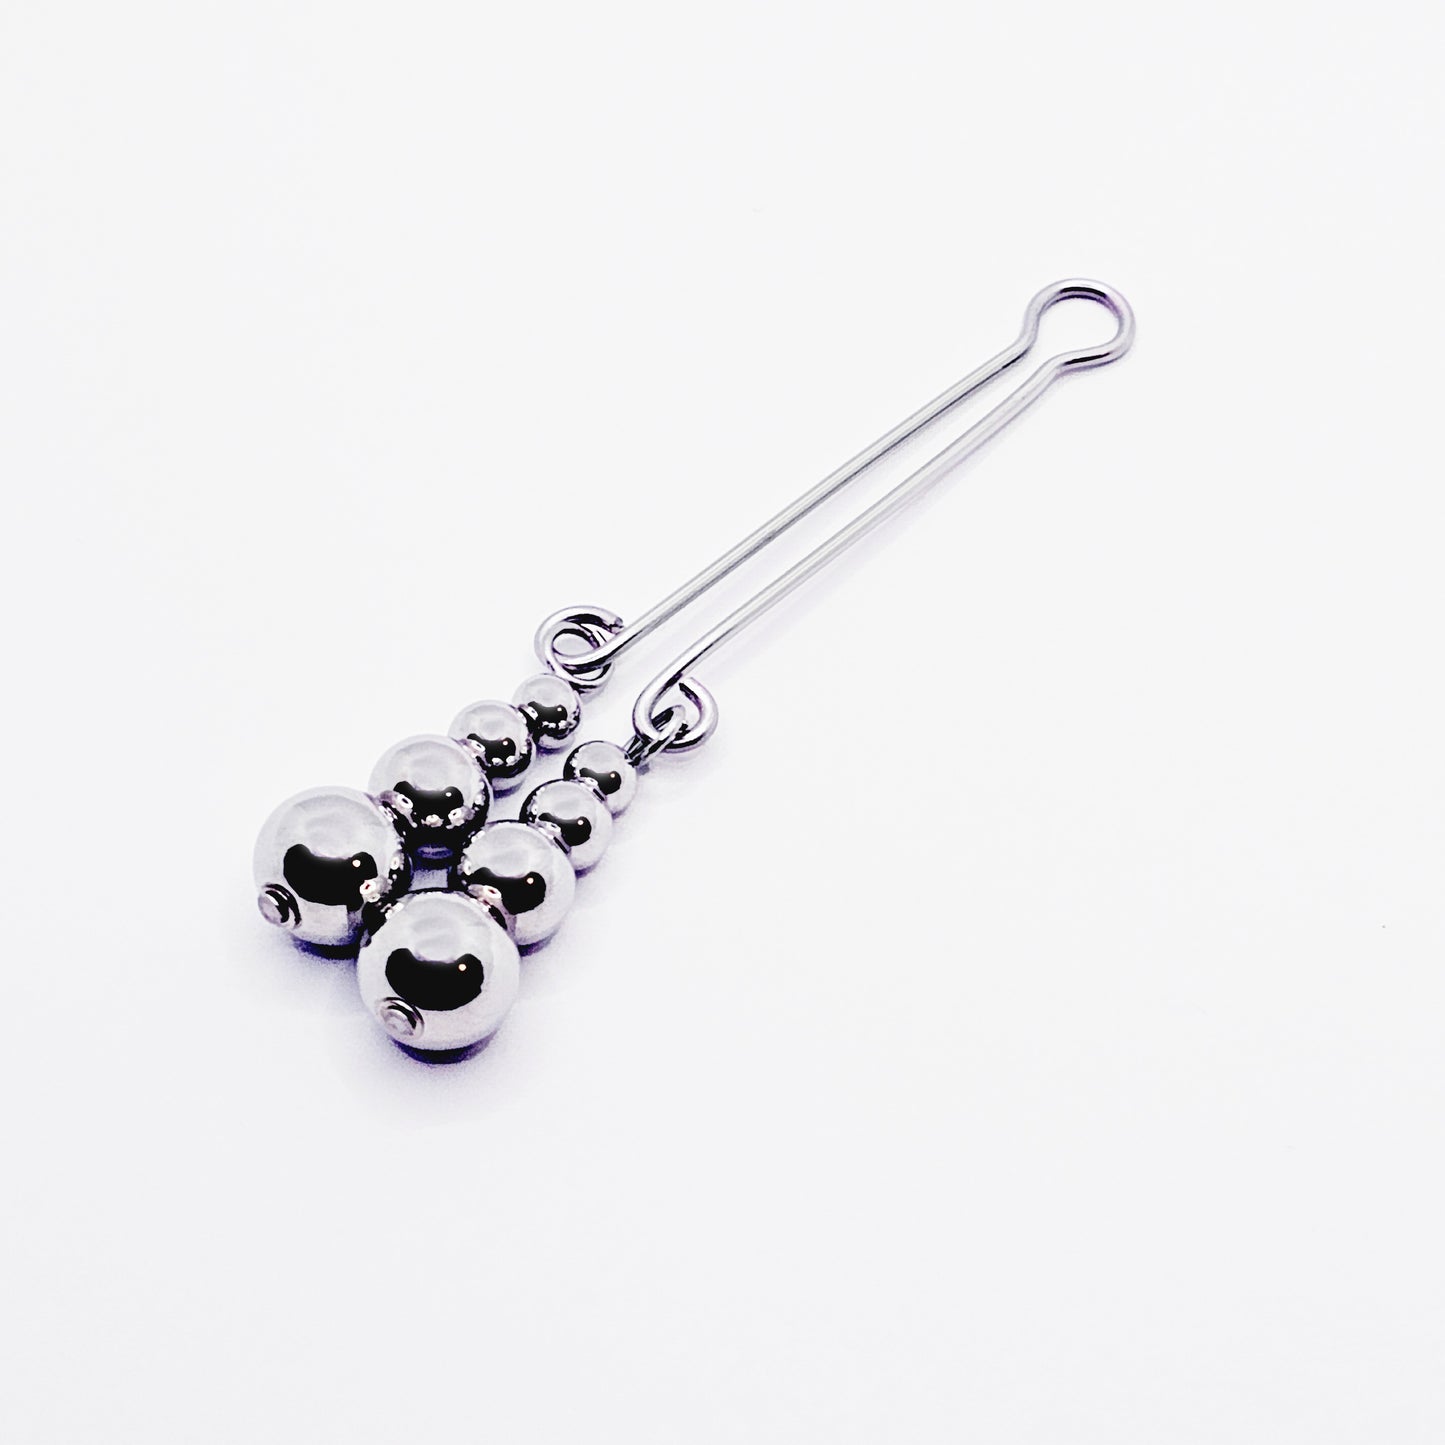 Stainless Steel Clit Clamp / Labia Clip with Weighted Beads